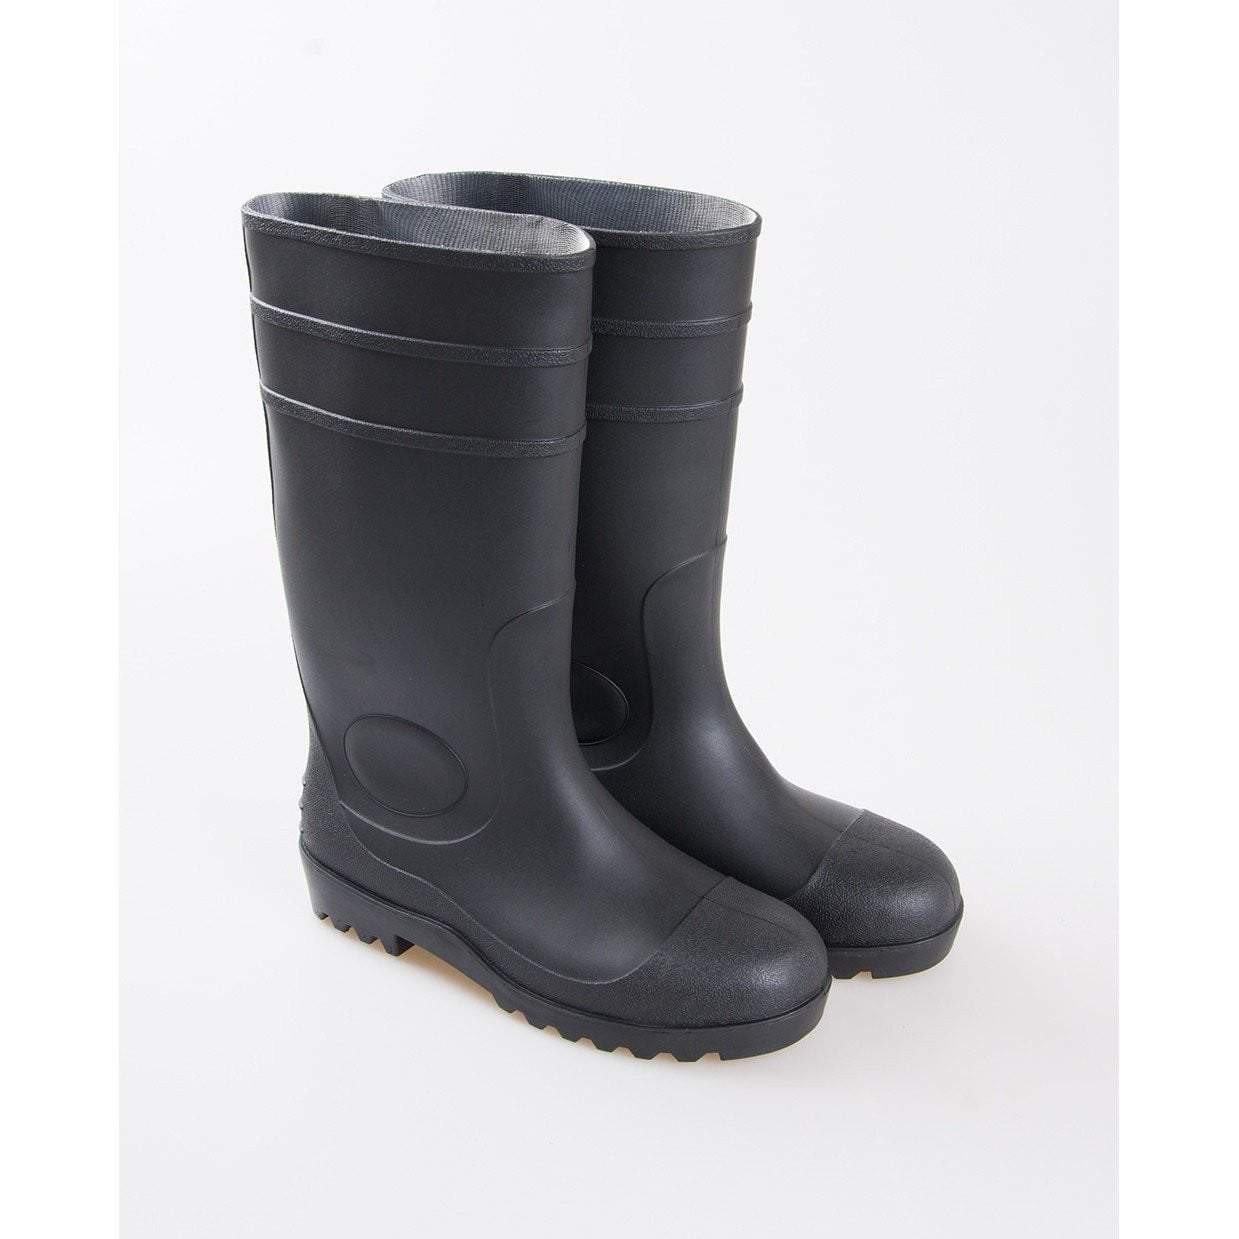 Gumboots Water Boot Knee Length Wayne/Skipper-Wetsuit Hoods, Gloves & Boots-Private Label PPE-diyshop.co.za